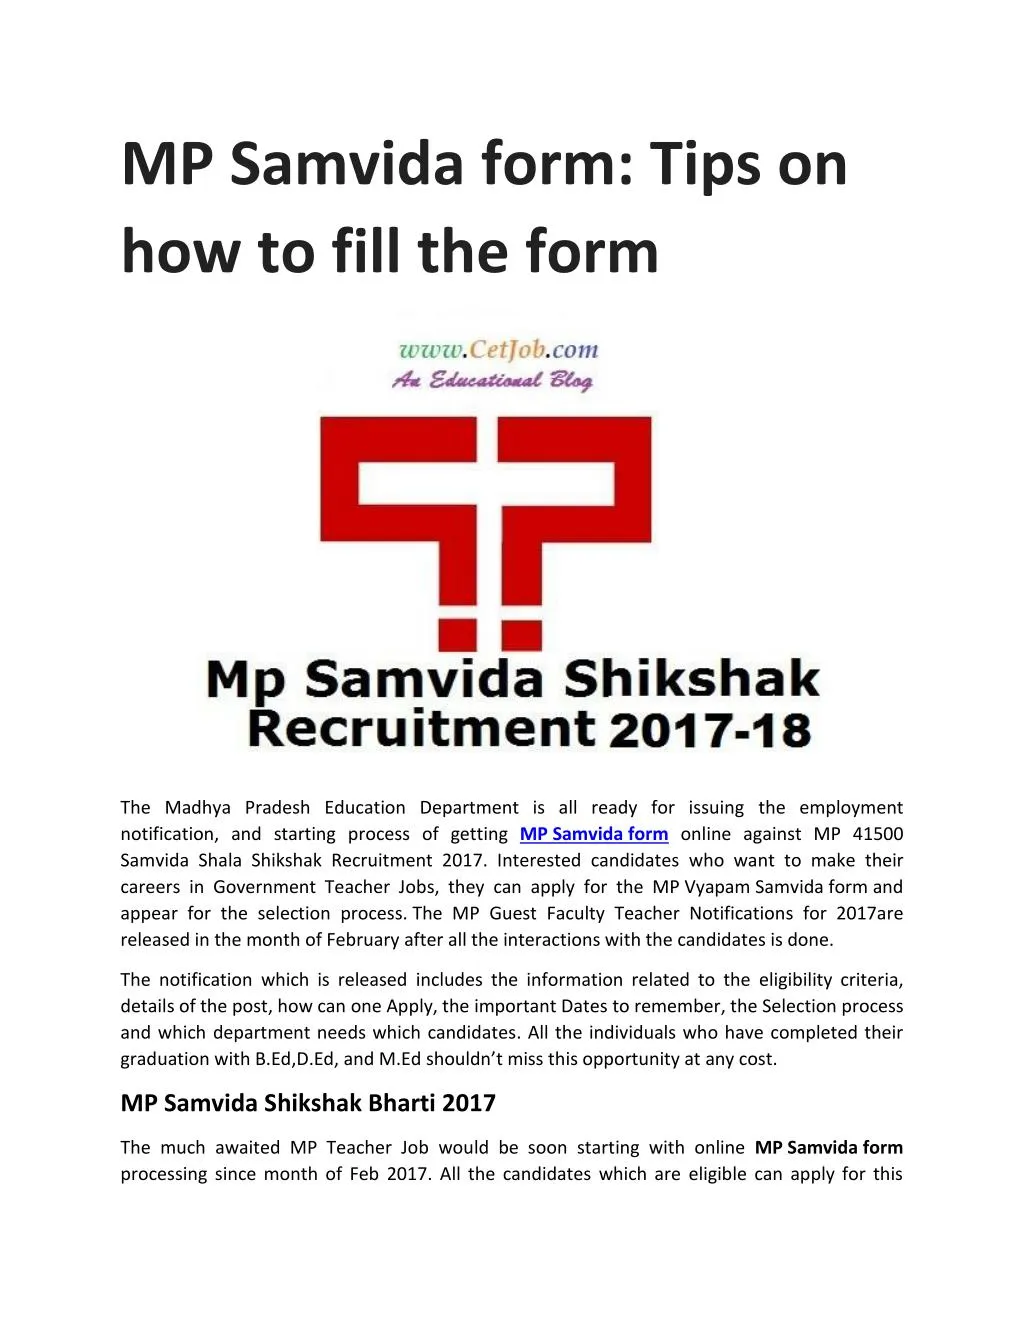 mp samvida form tips on how to fill the form